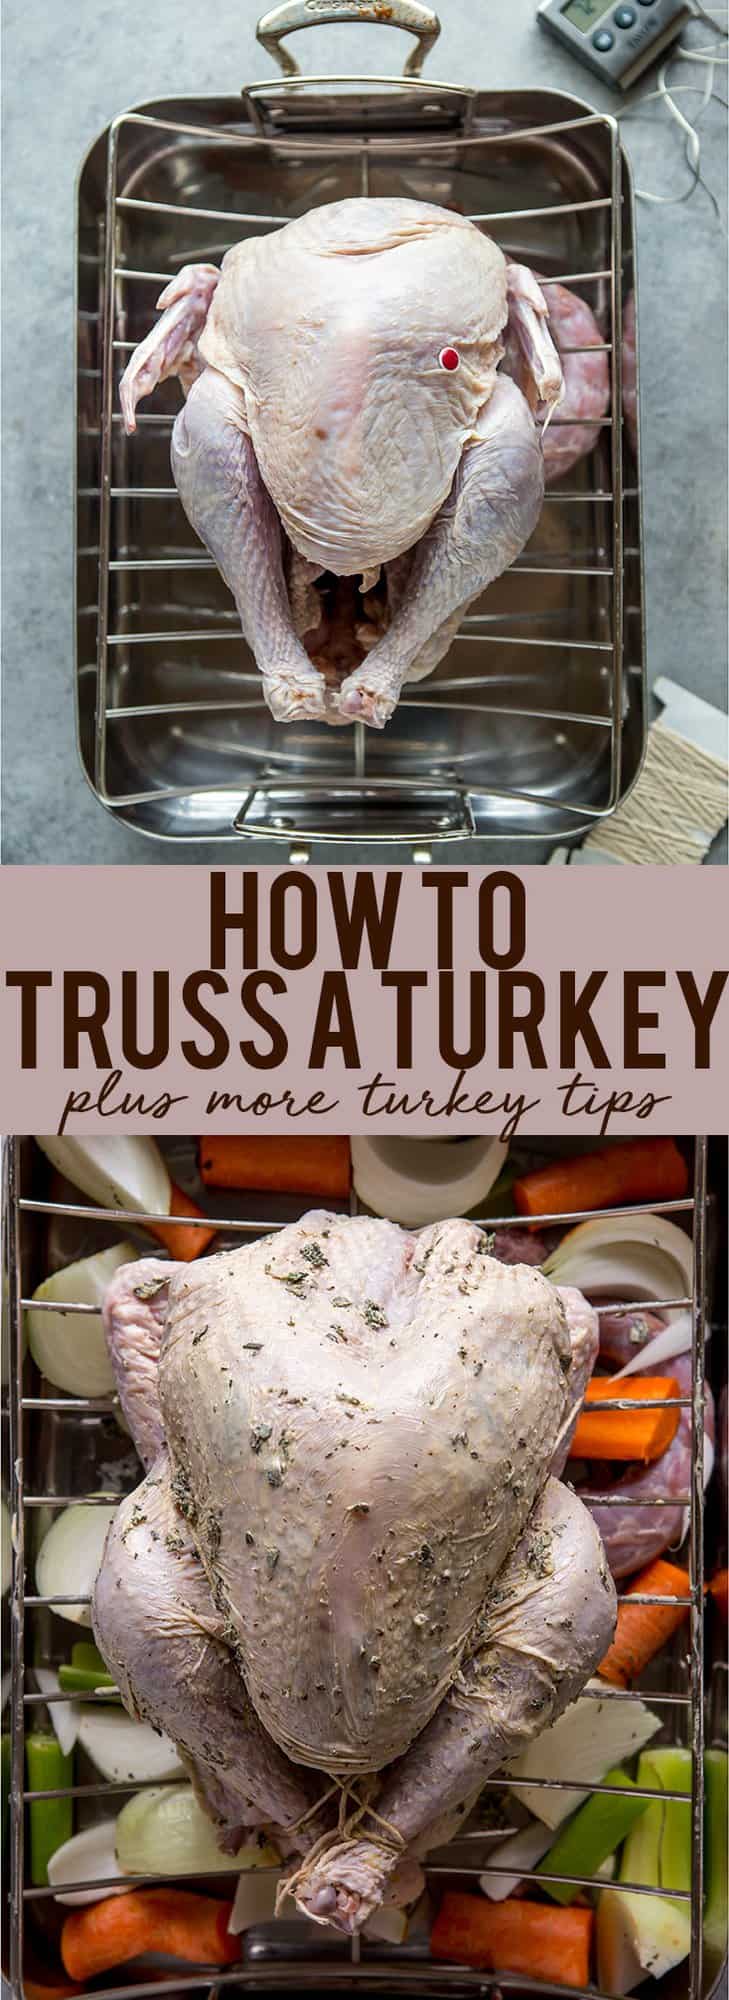 How to truss a turkey | How to prepare a turkey | How to tie a Turkey | Turkey Tips | Tips for first time hosting thanksgiving | How to make a turkey